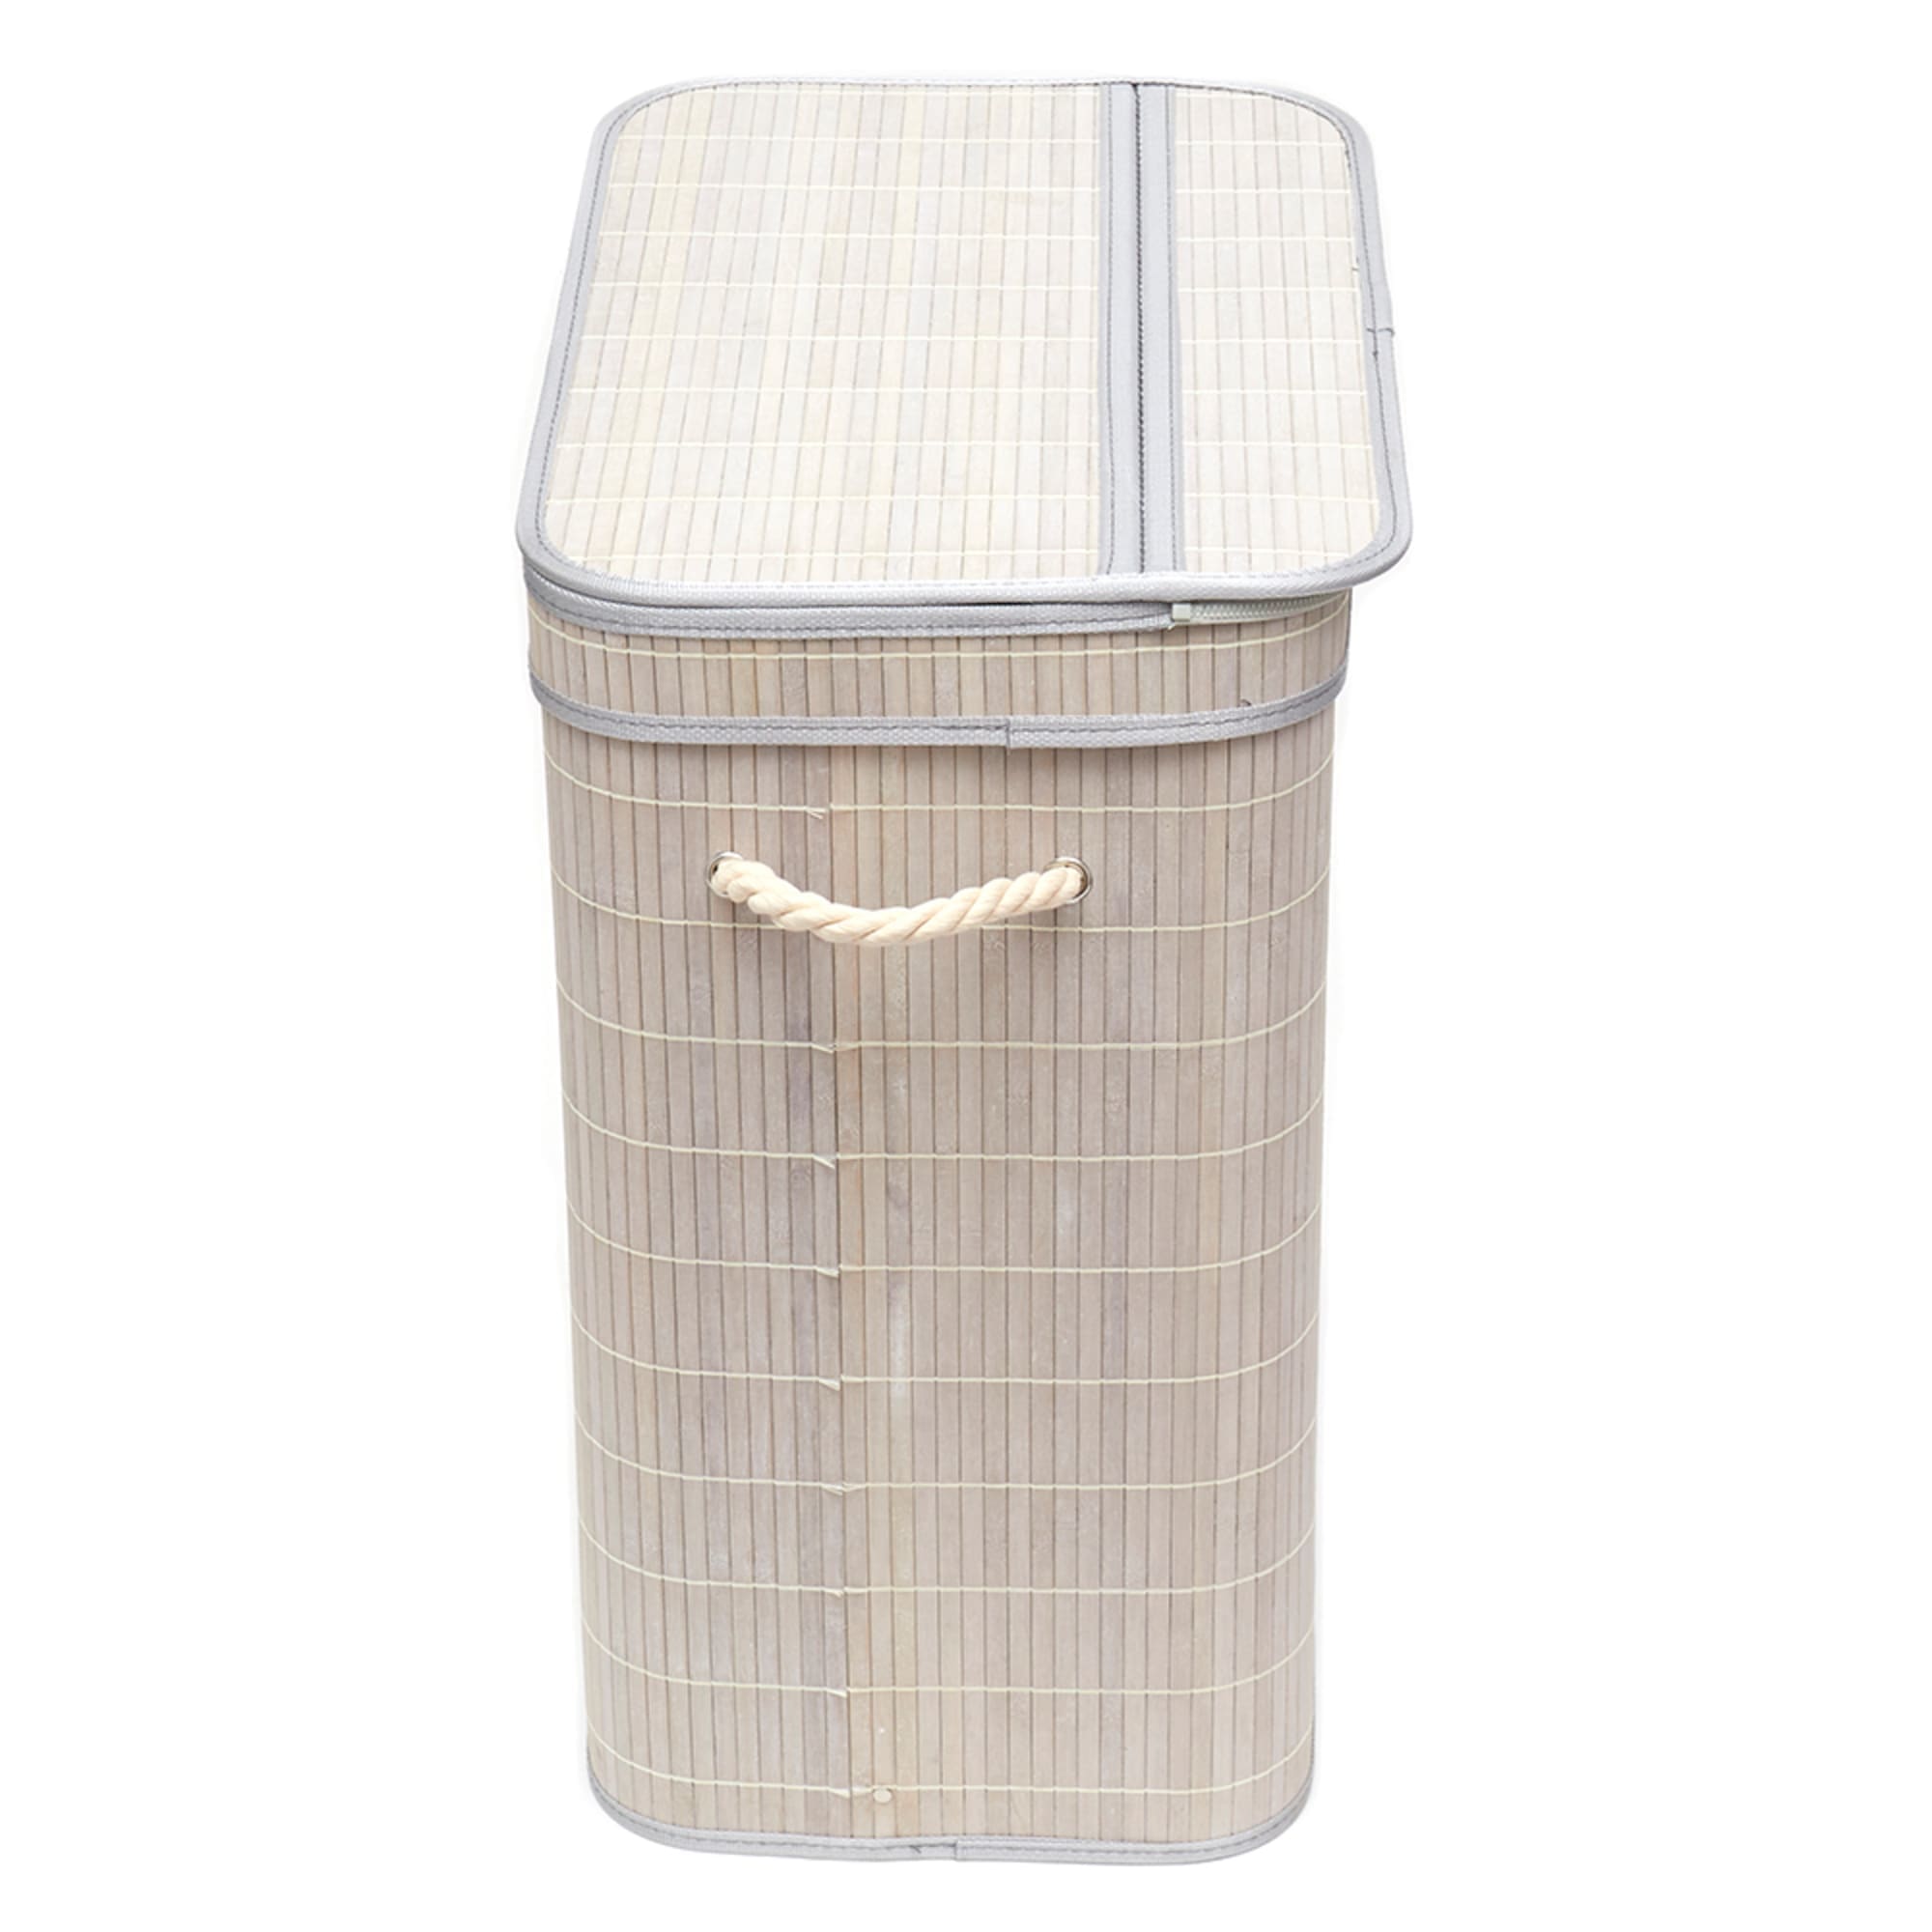 Home Basics 2 Compartment Folding Rectangle Bamboo Hamper with Liner, Grey $25.00 EACH, CASE PACK OF 6